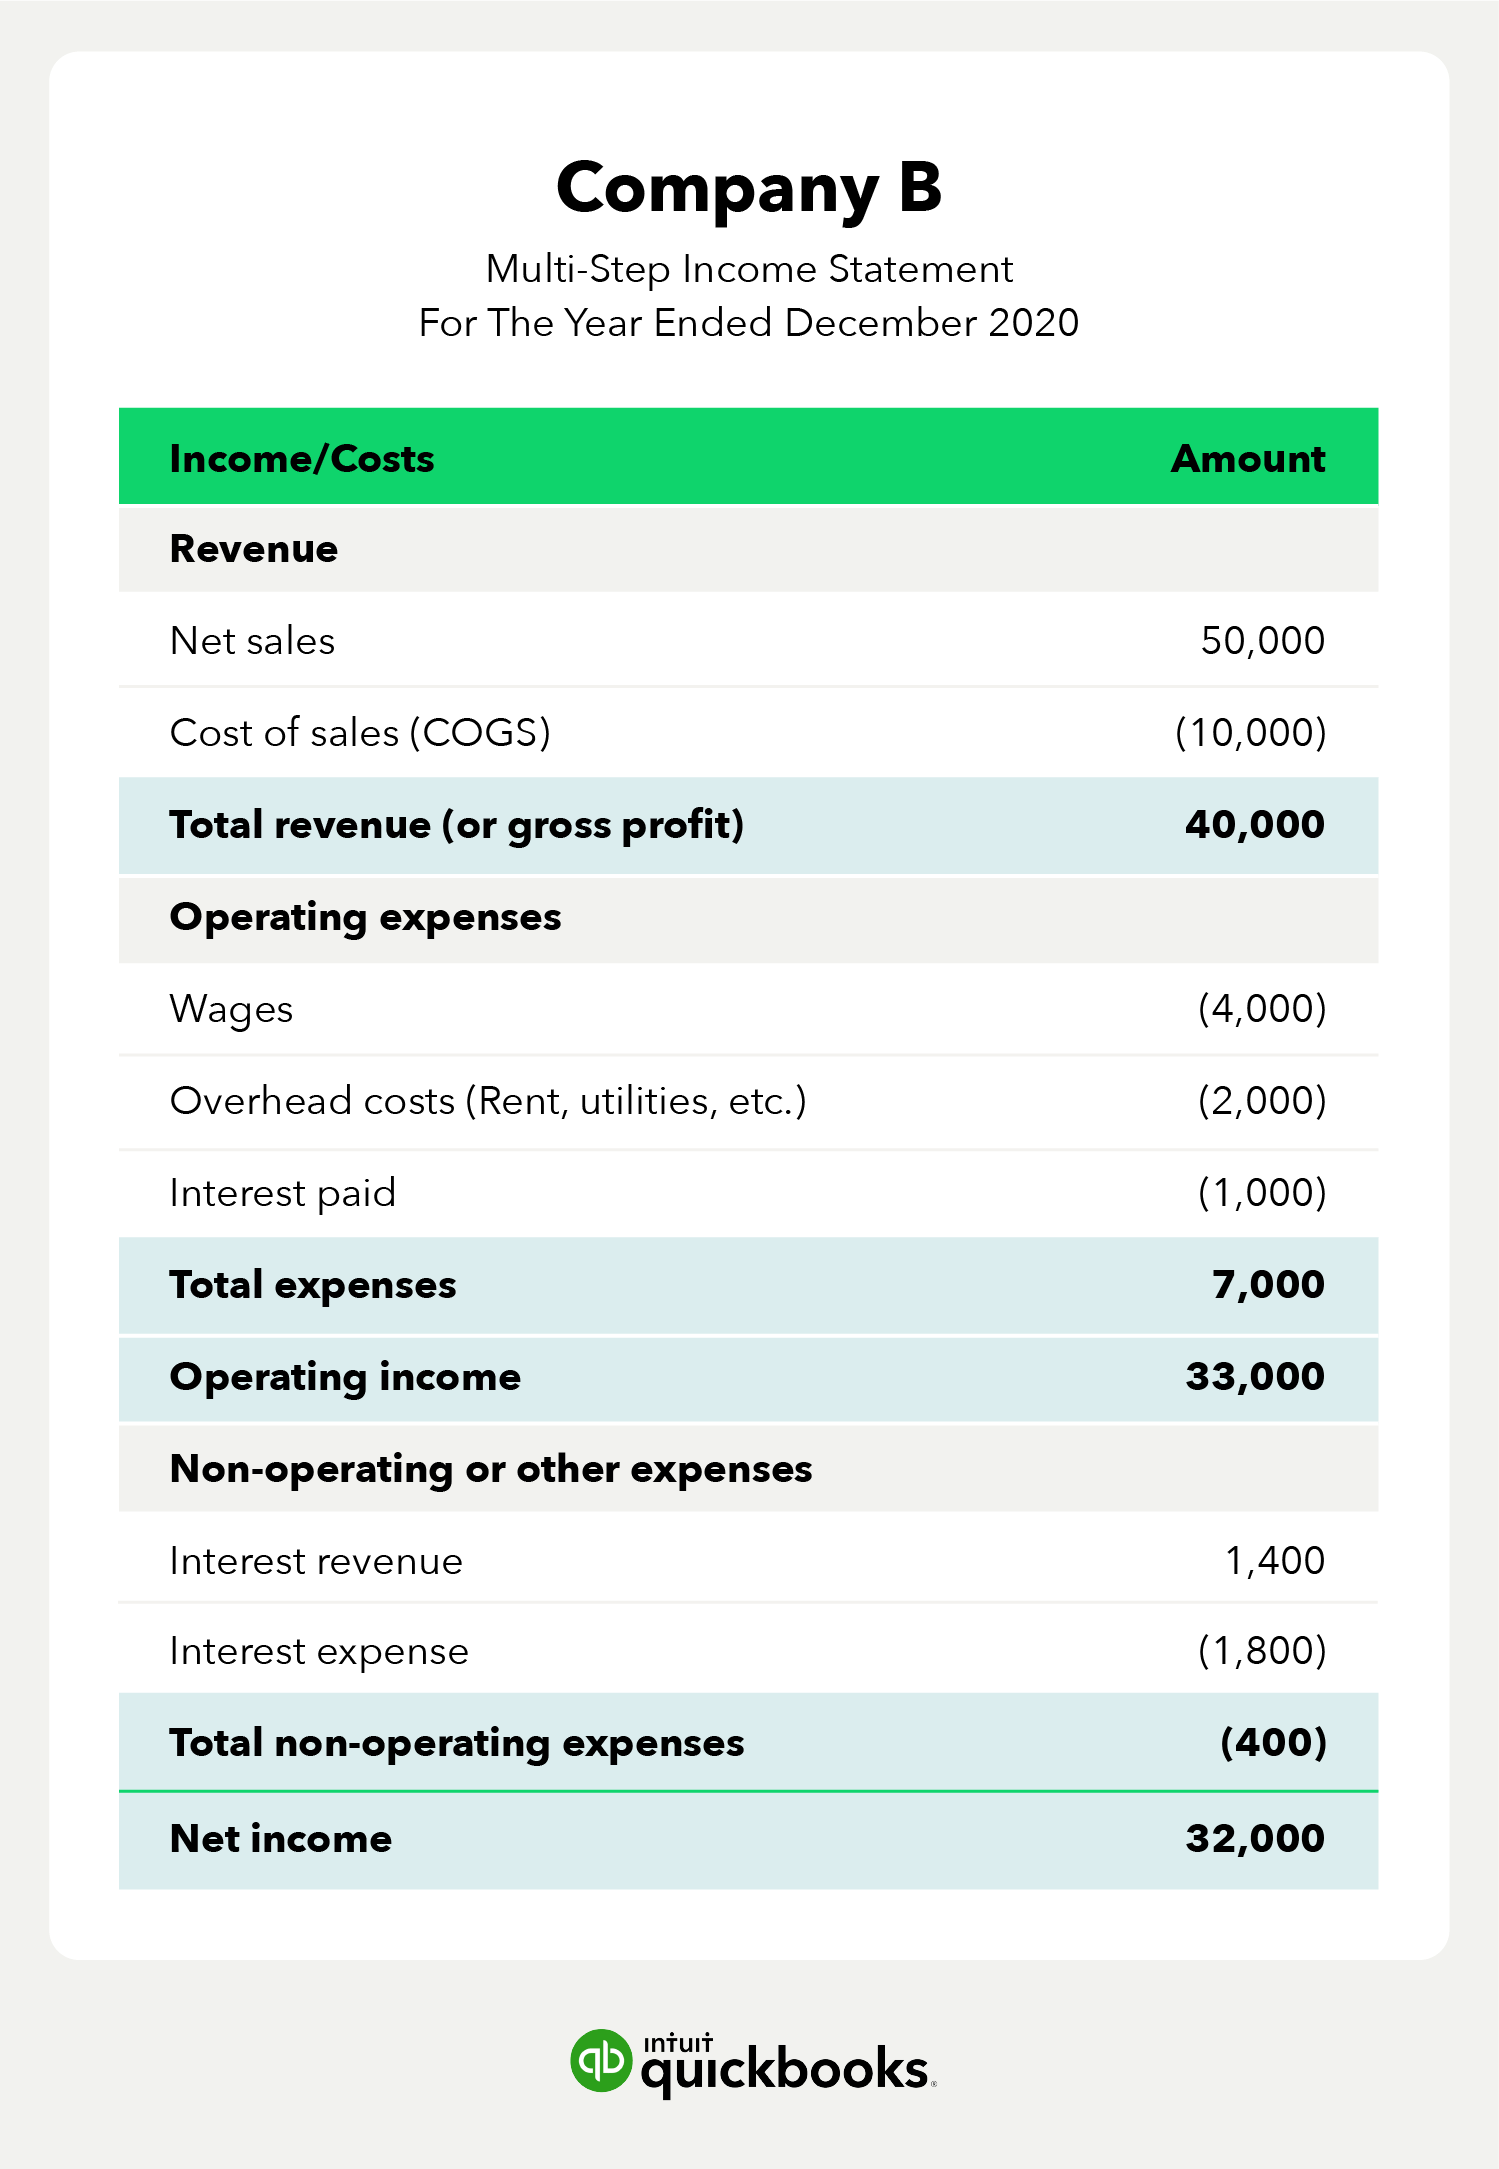 Example of a multi-step income statement laid out in a chart